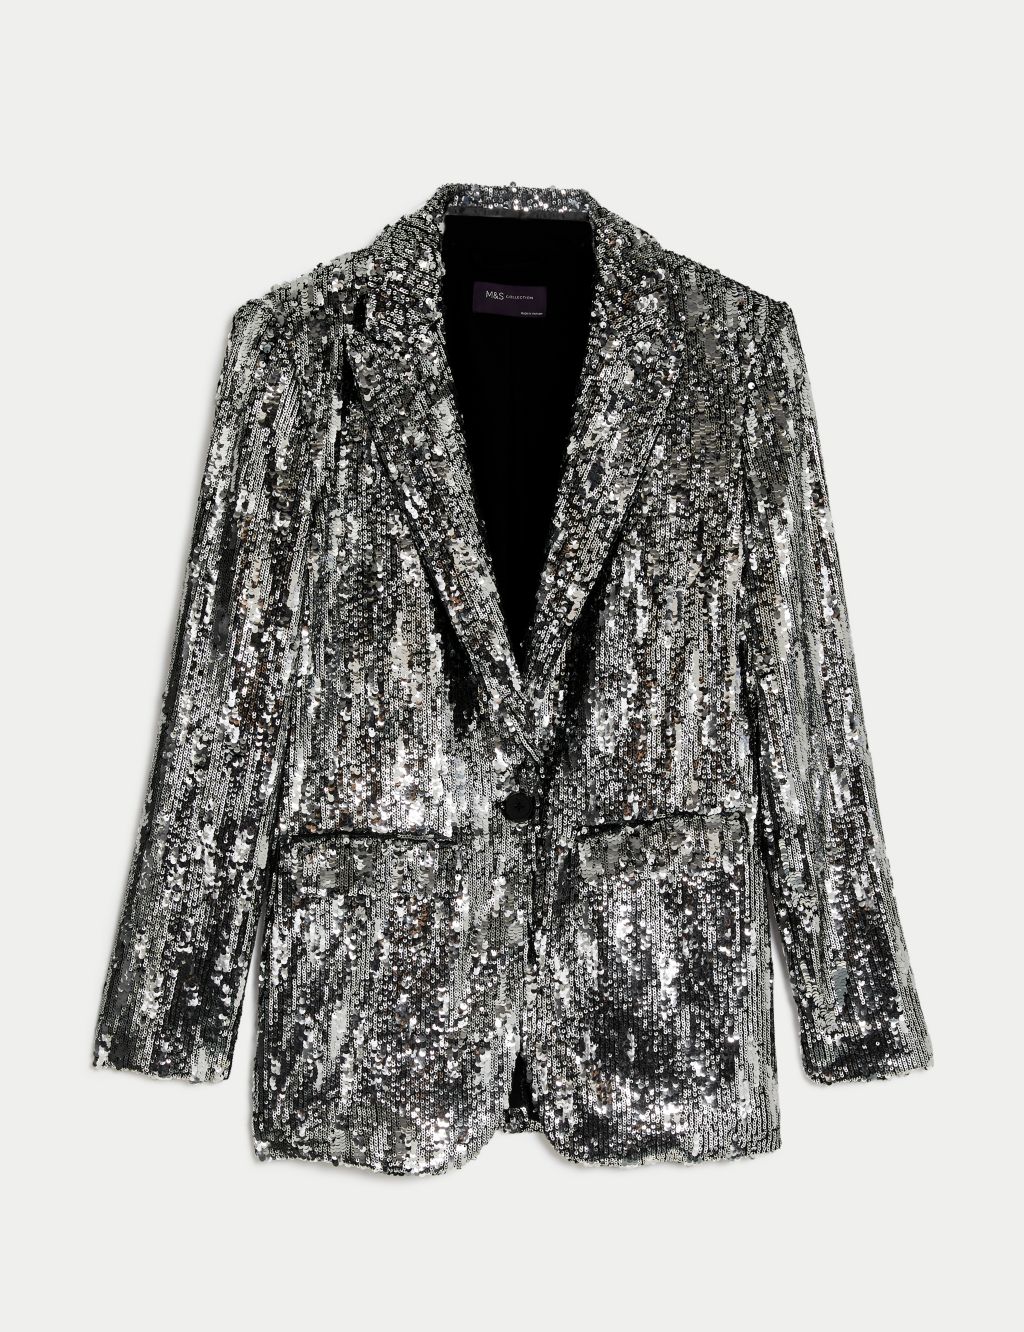 Tailored Sequin Single Breasted Blazer image 2